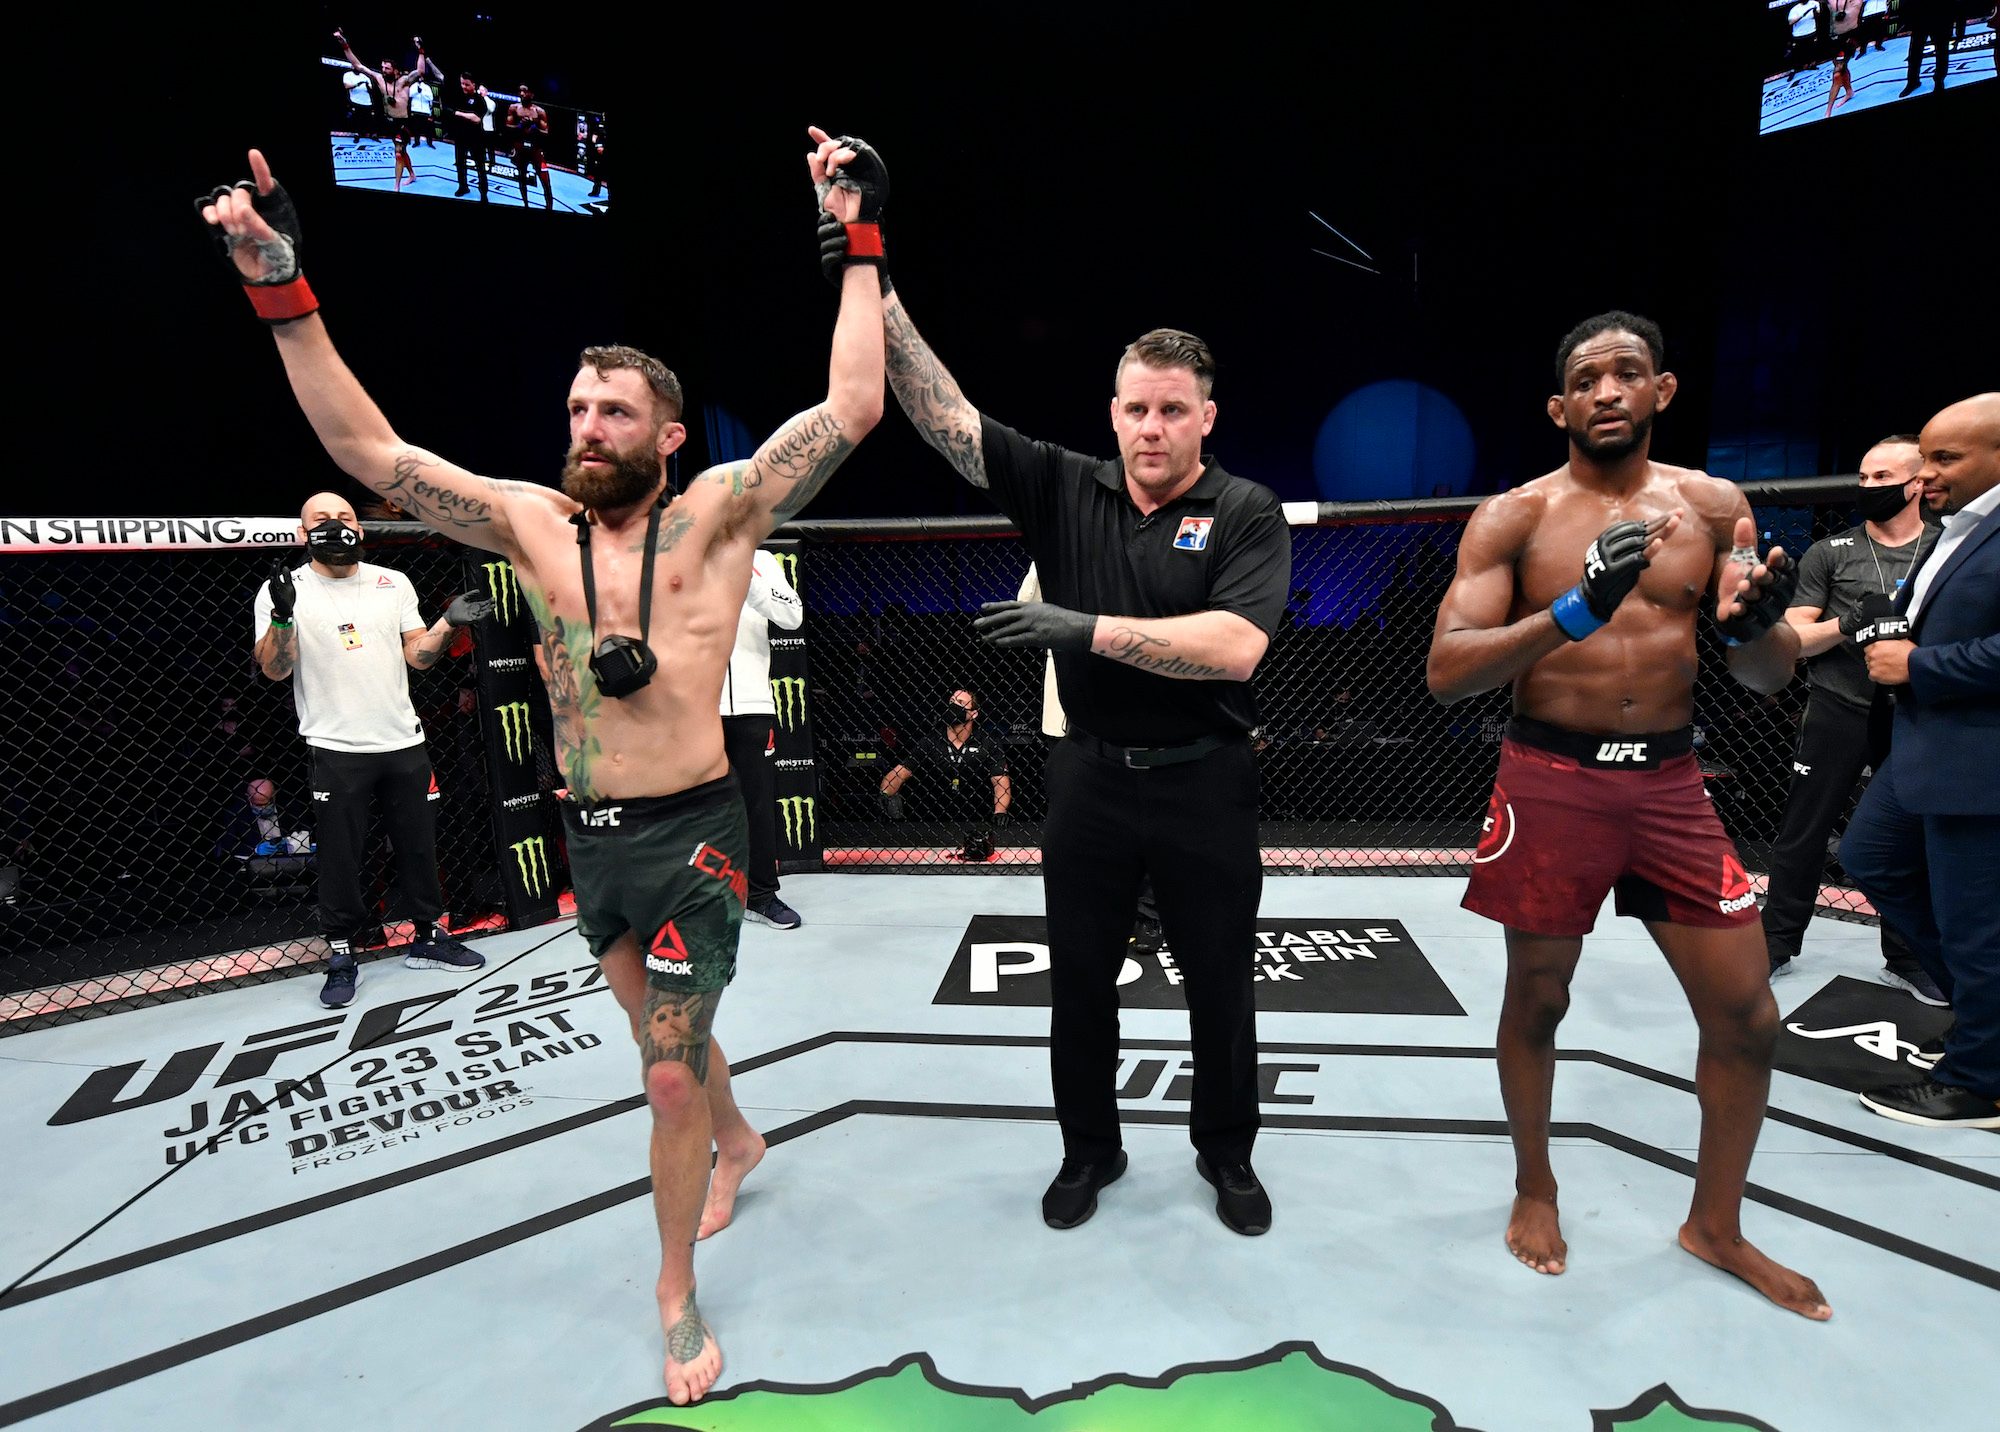 Chiesa asserts grappling dominance, picks up win over Magny